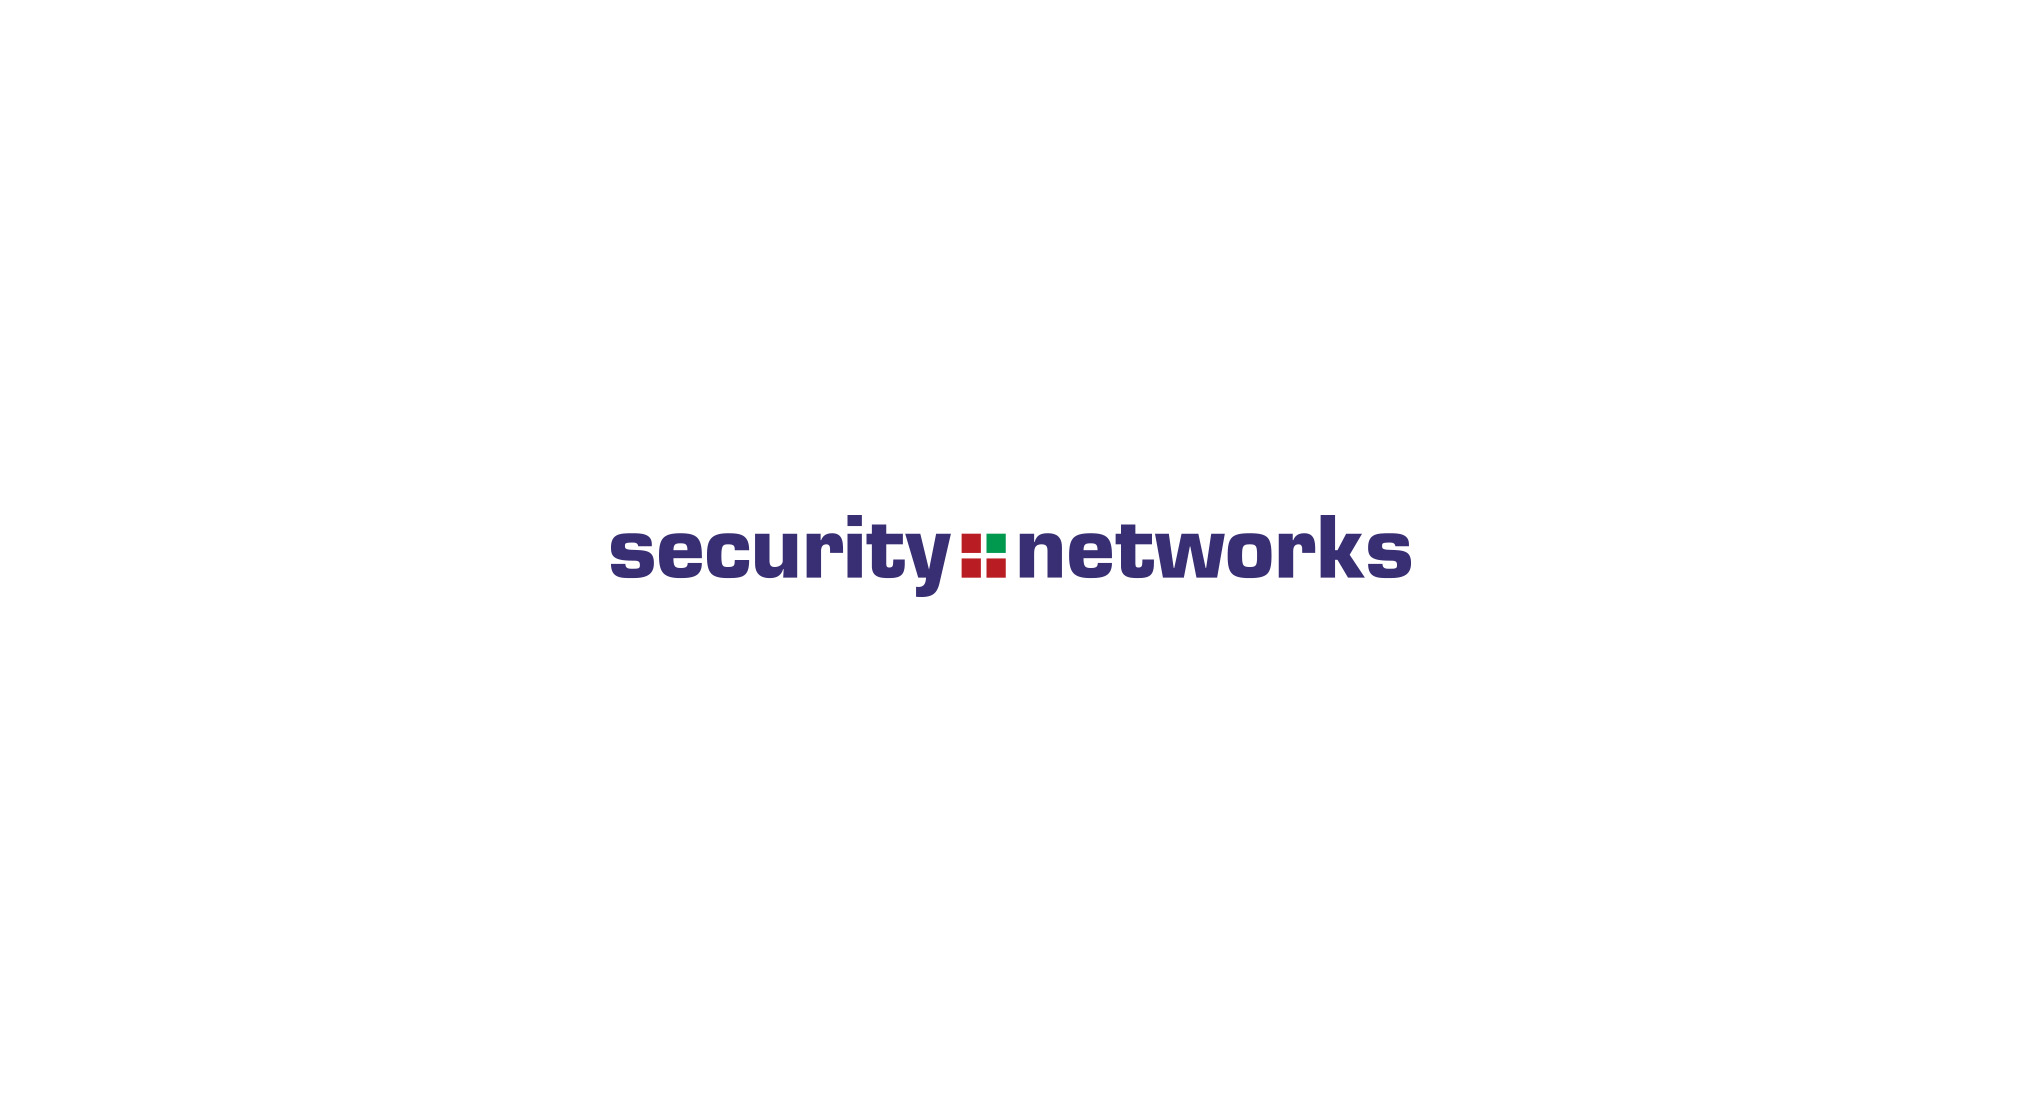 Security Networks